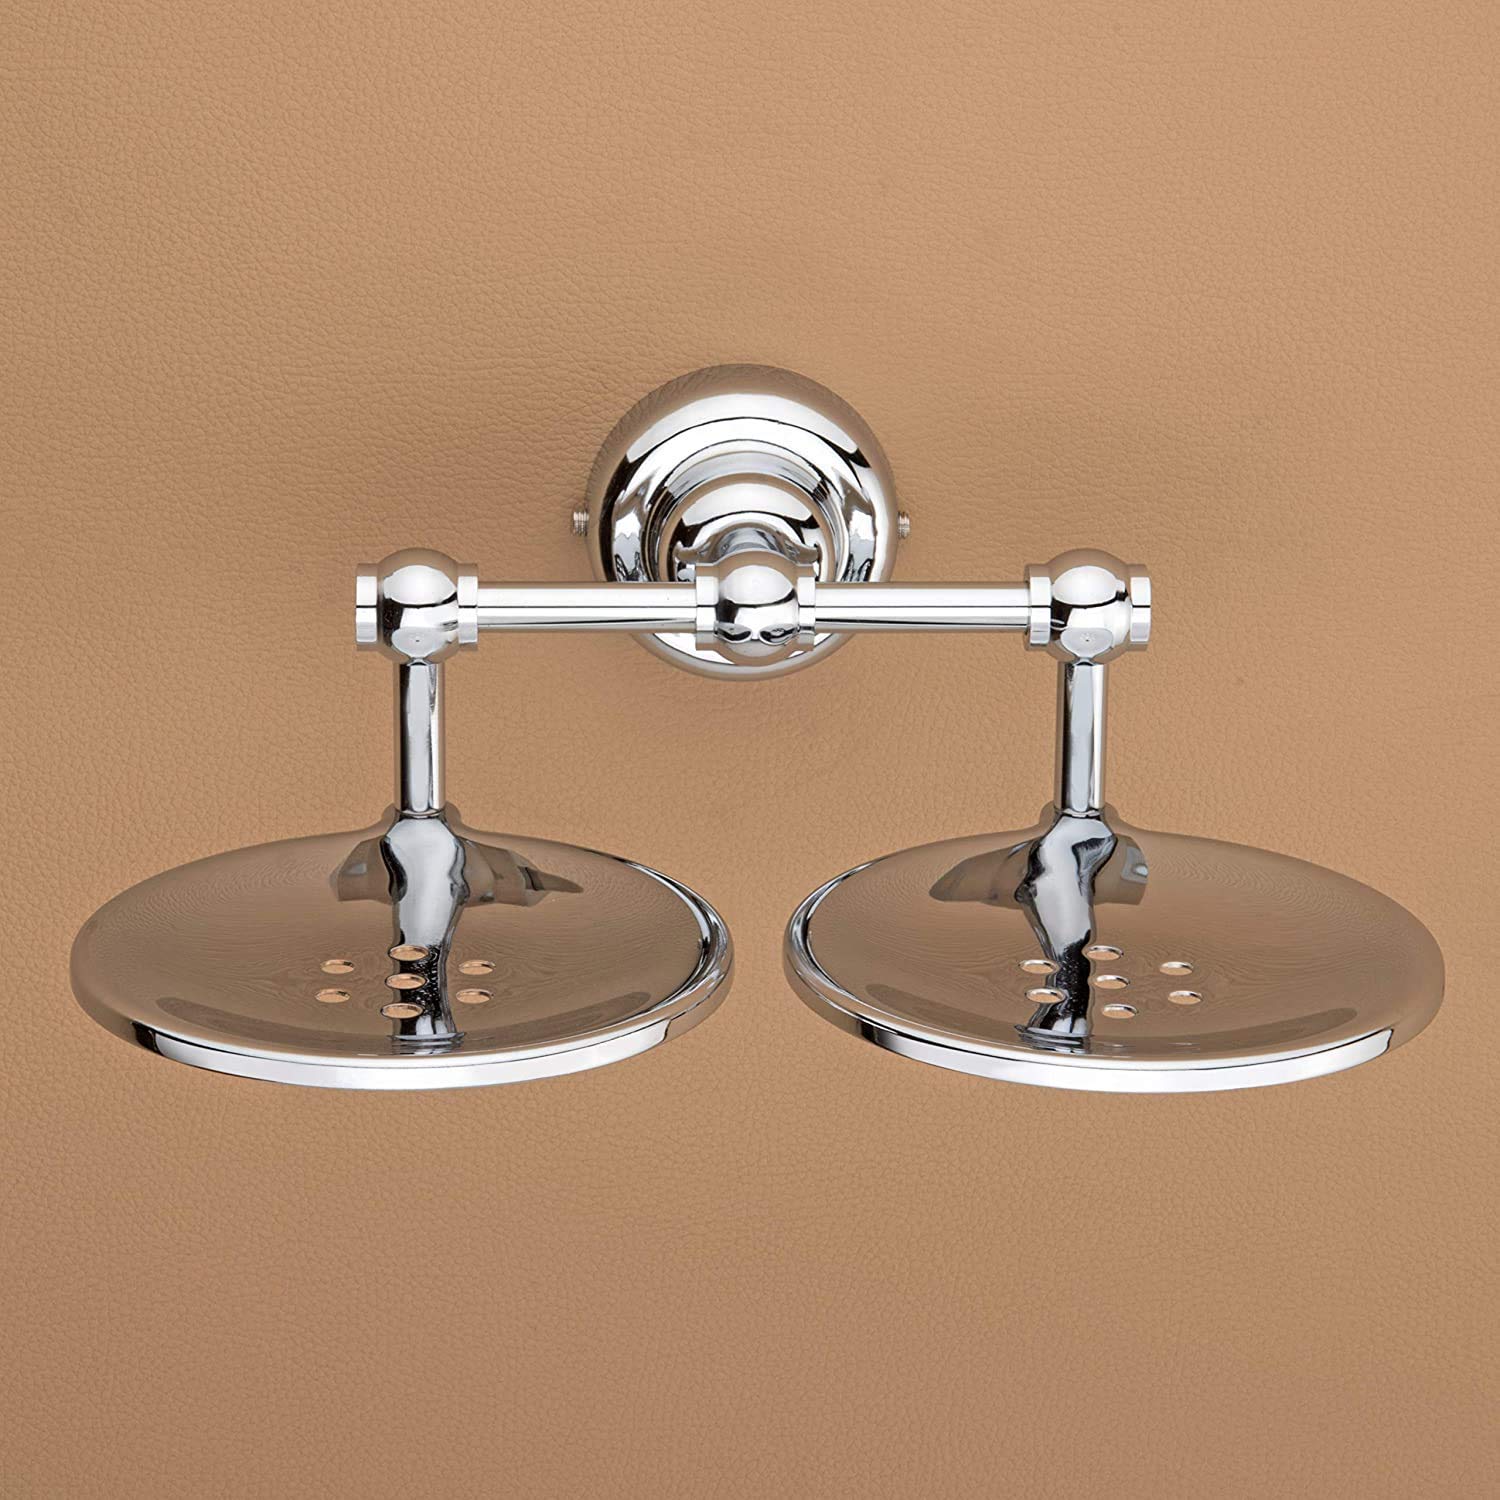 Plantex Stainless Steel 304 Grade Skyllo Double Soap Holder for Bathroom/Soap Dish/Bathroom Soap Stand/Bathroom Accessories(Chrome) - Pack of 3